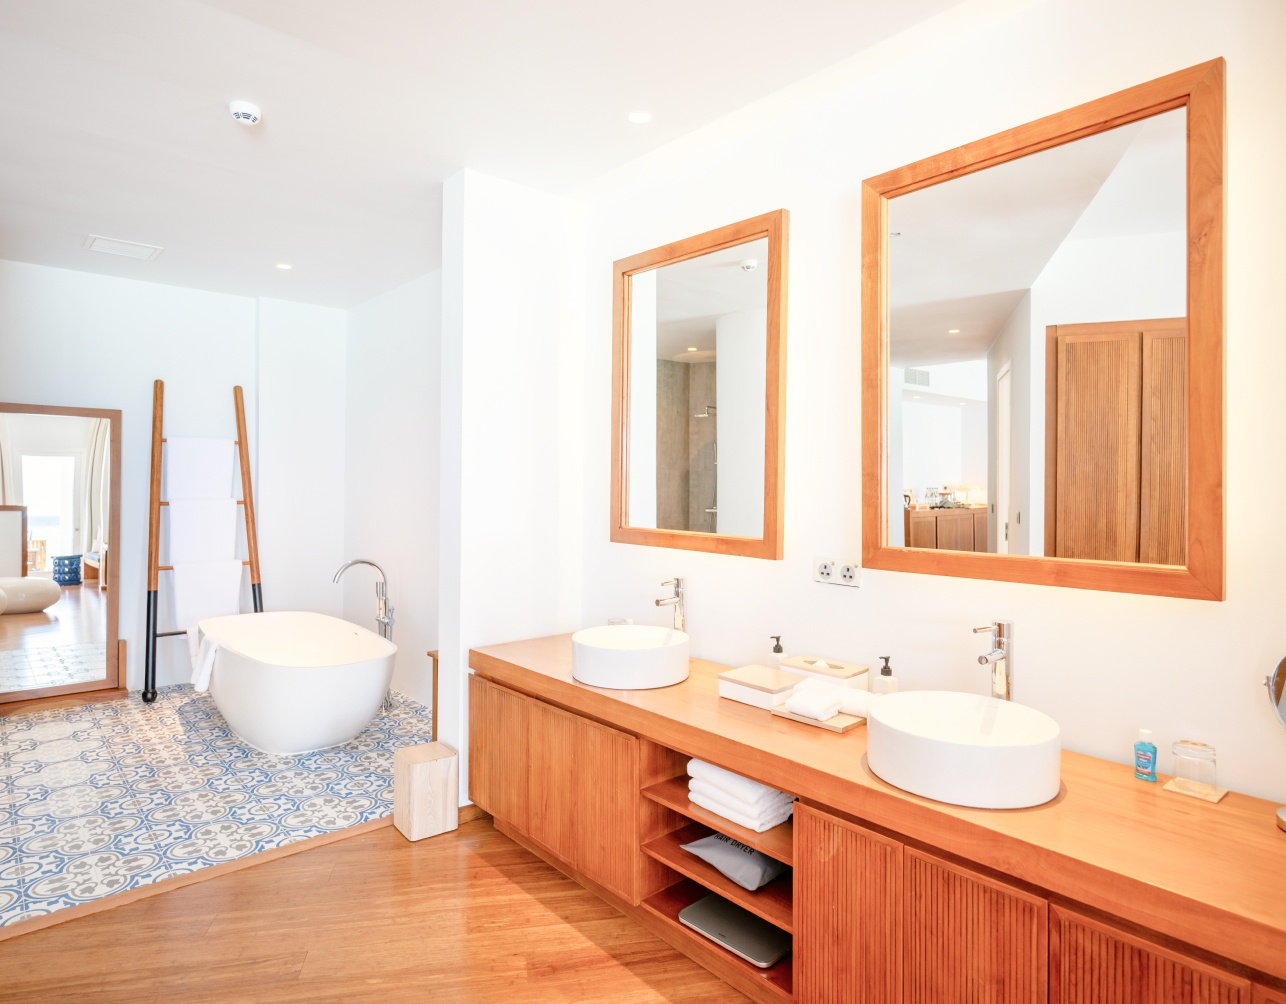 The full bathroom with spacious soaking tub for 2 and double sinks inside our 2 bedroom water villa in the Maldives.